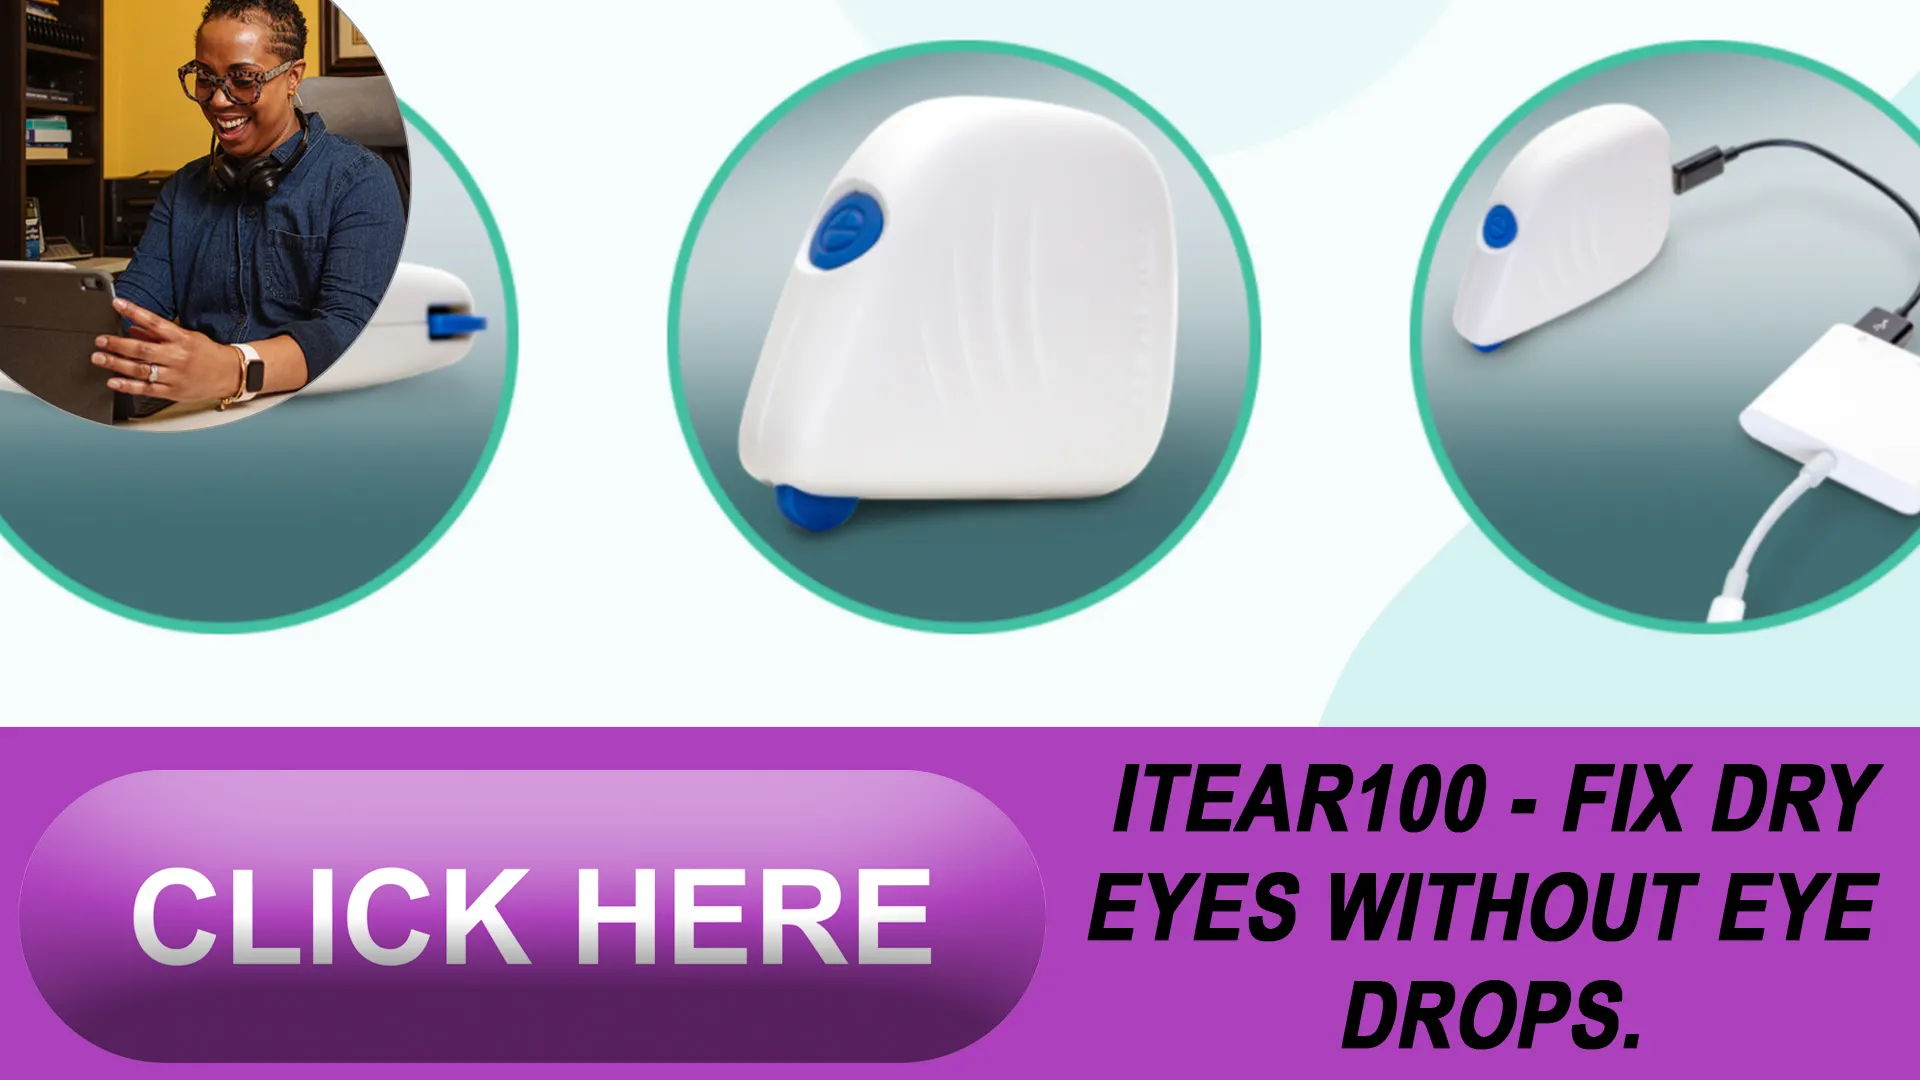 Benefits of Using the iTEAR100